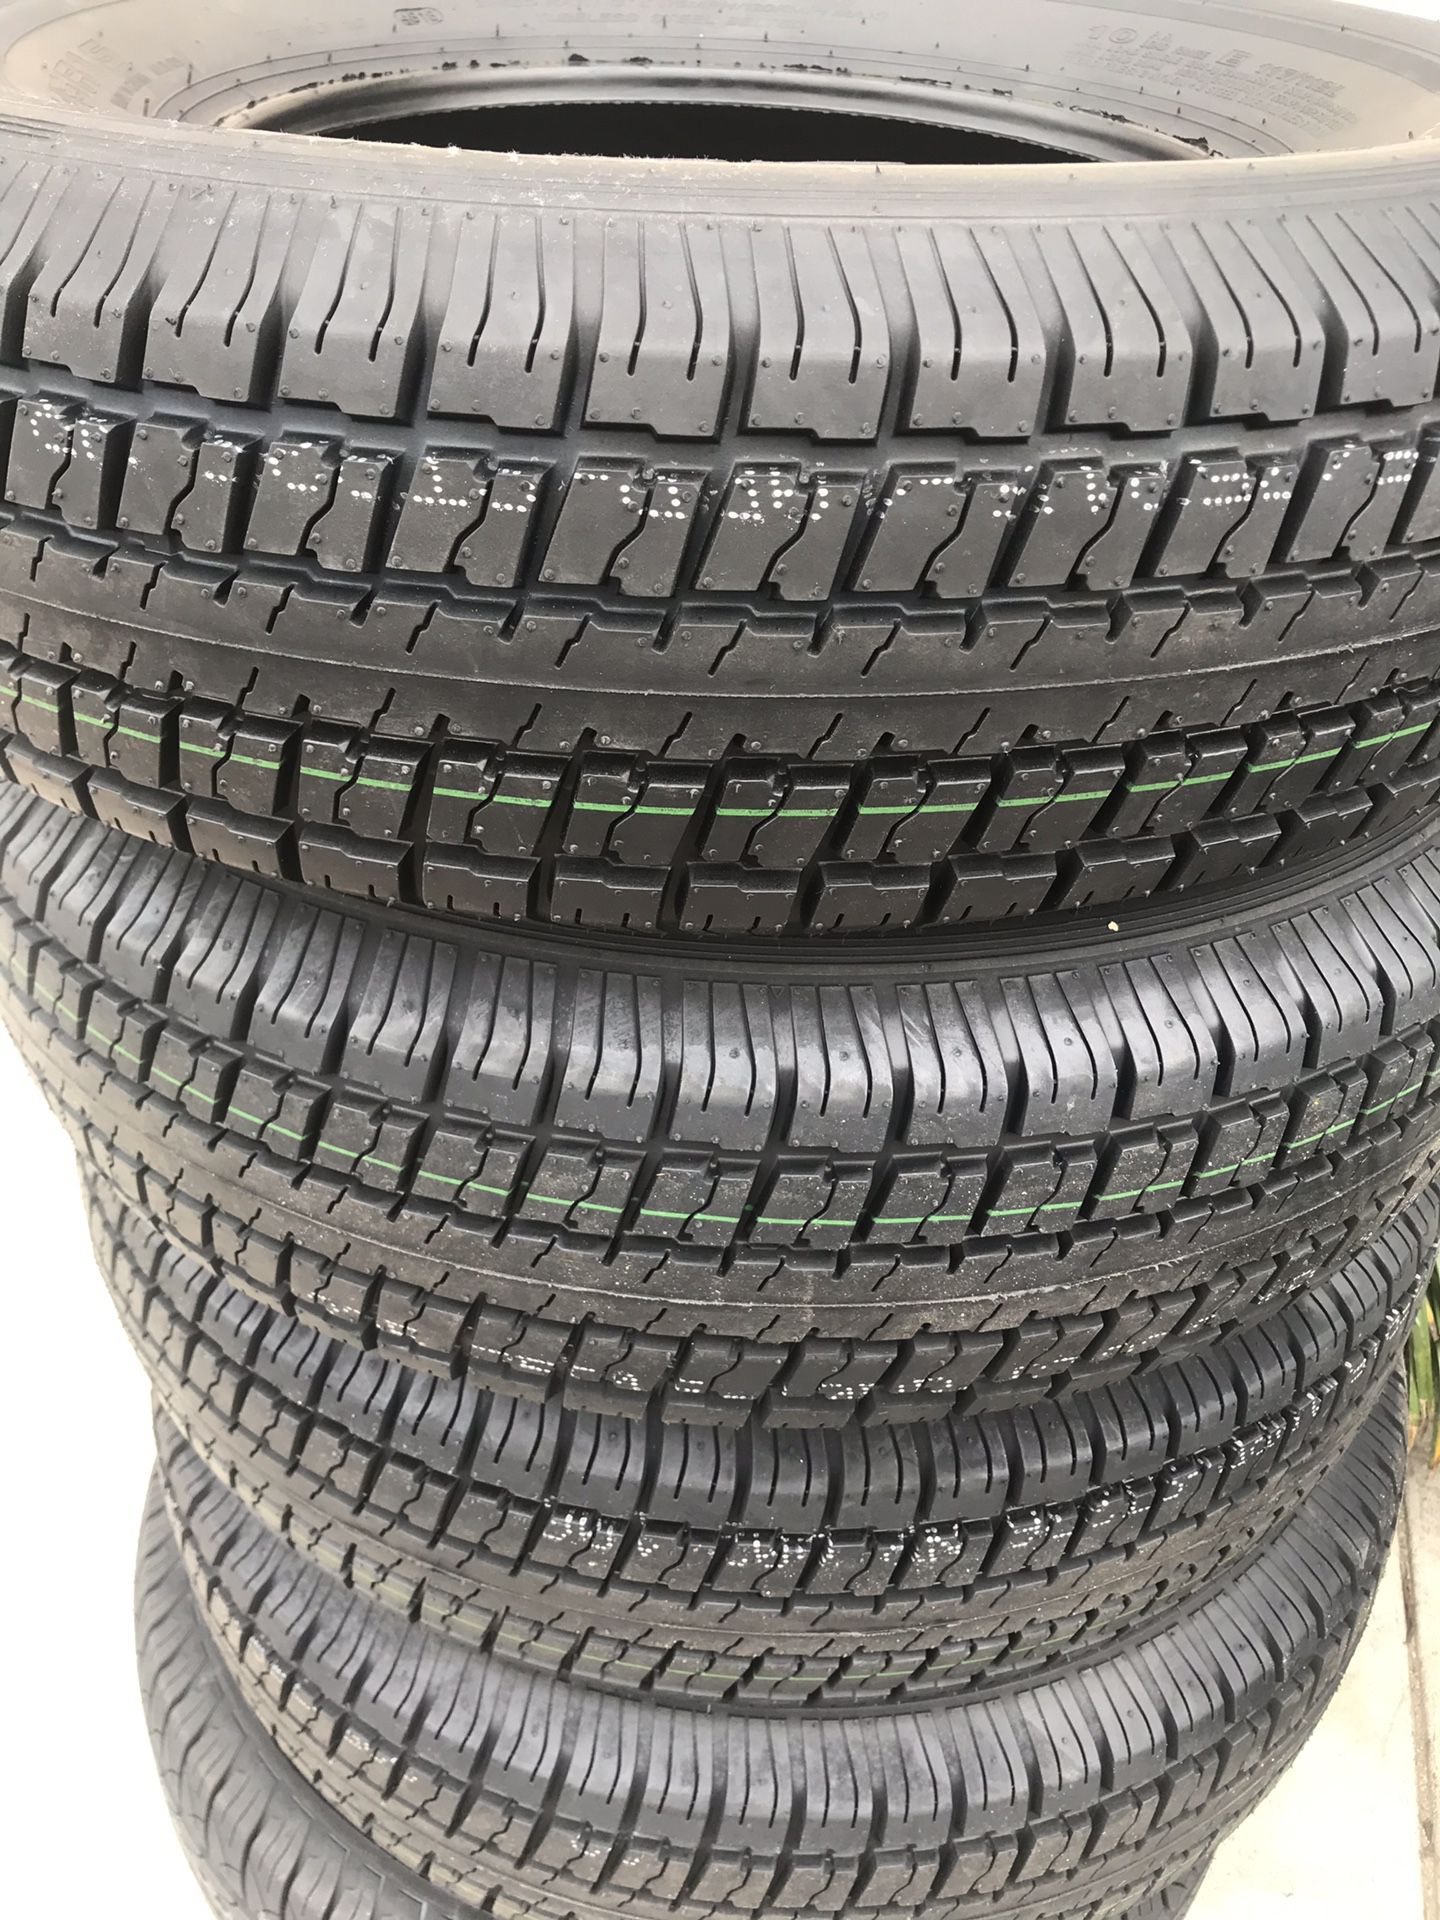 4x trailer tire 225x75 -15 10 ply $300  price firm no bargain